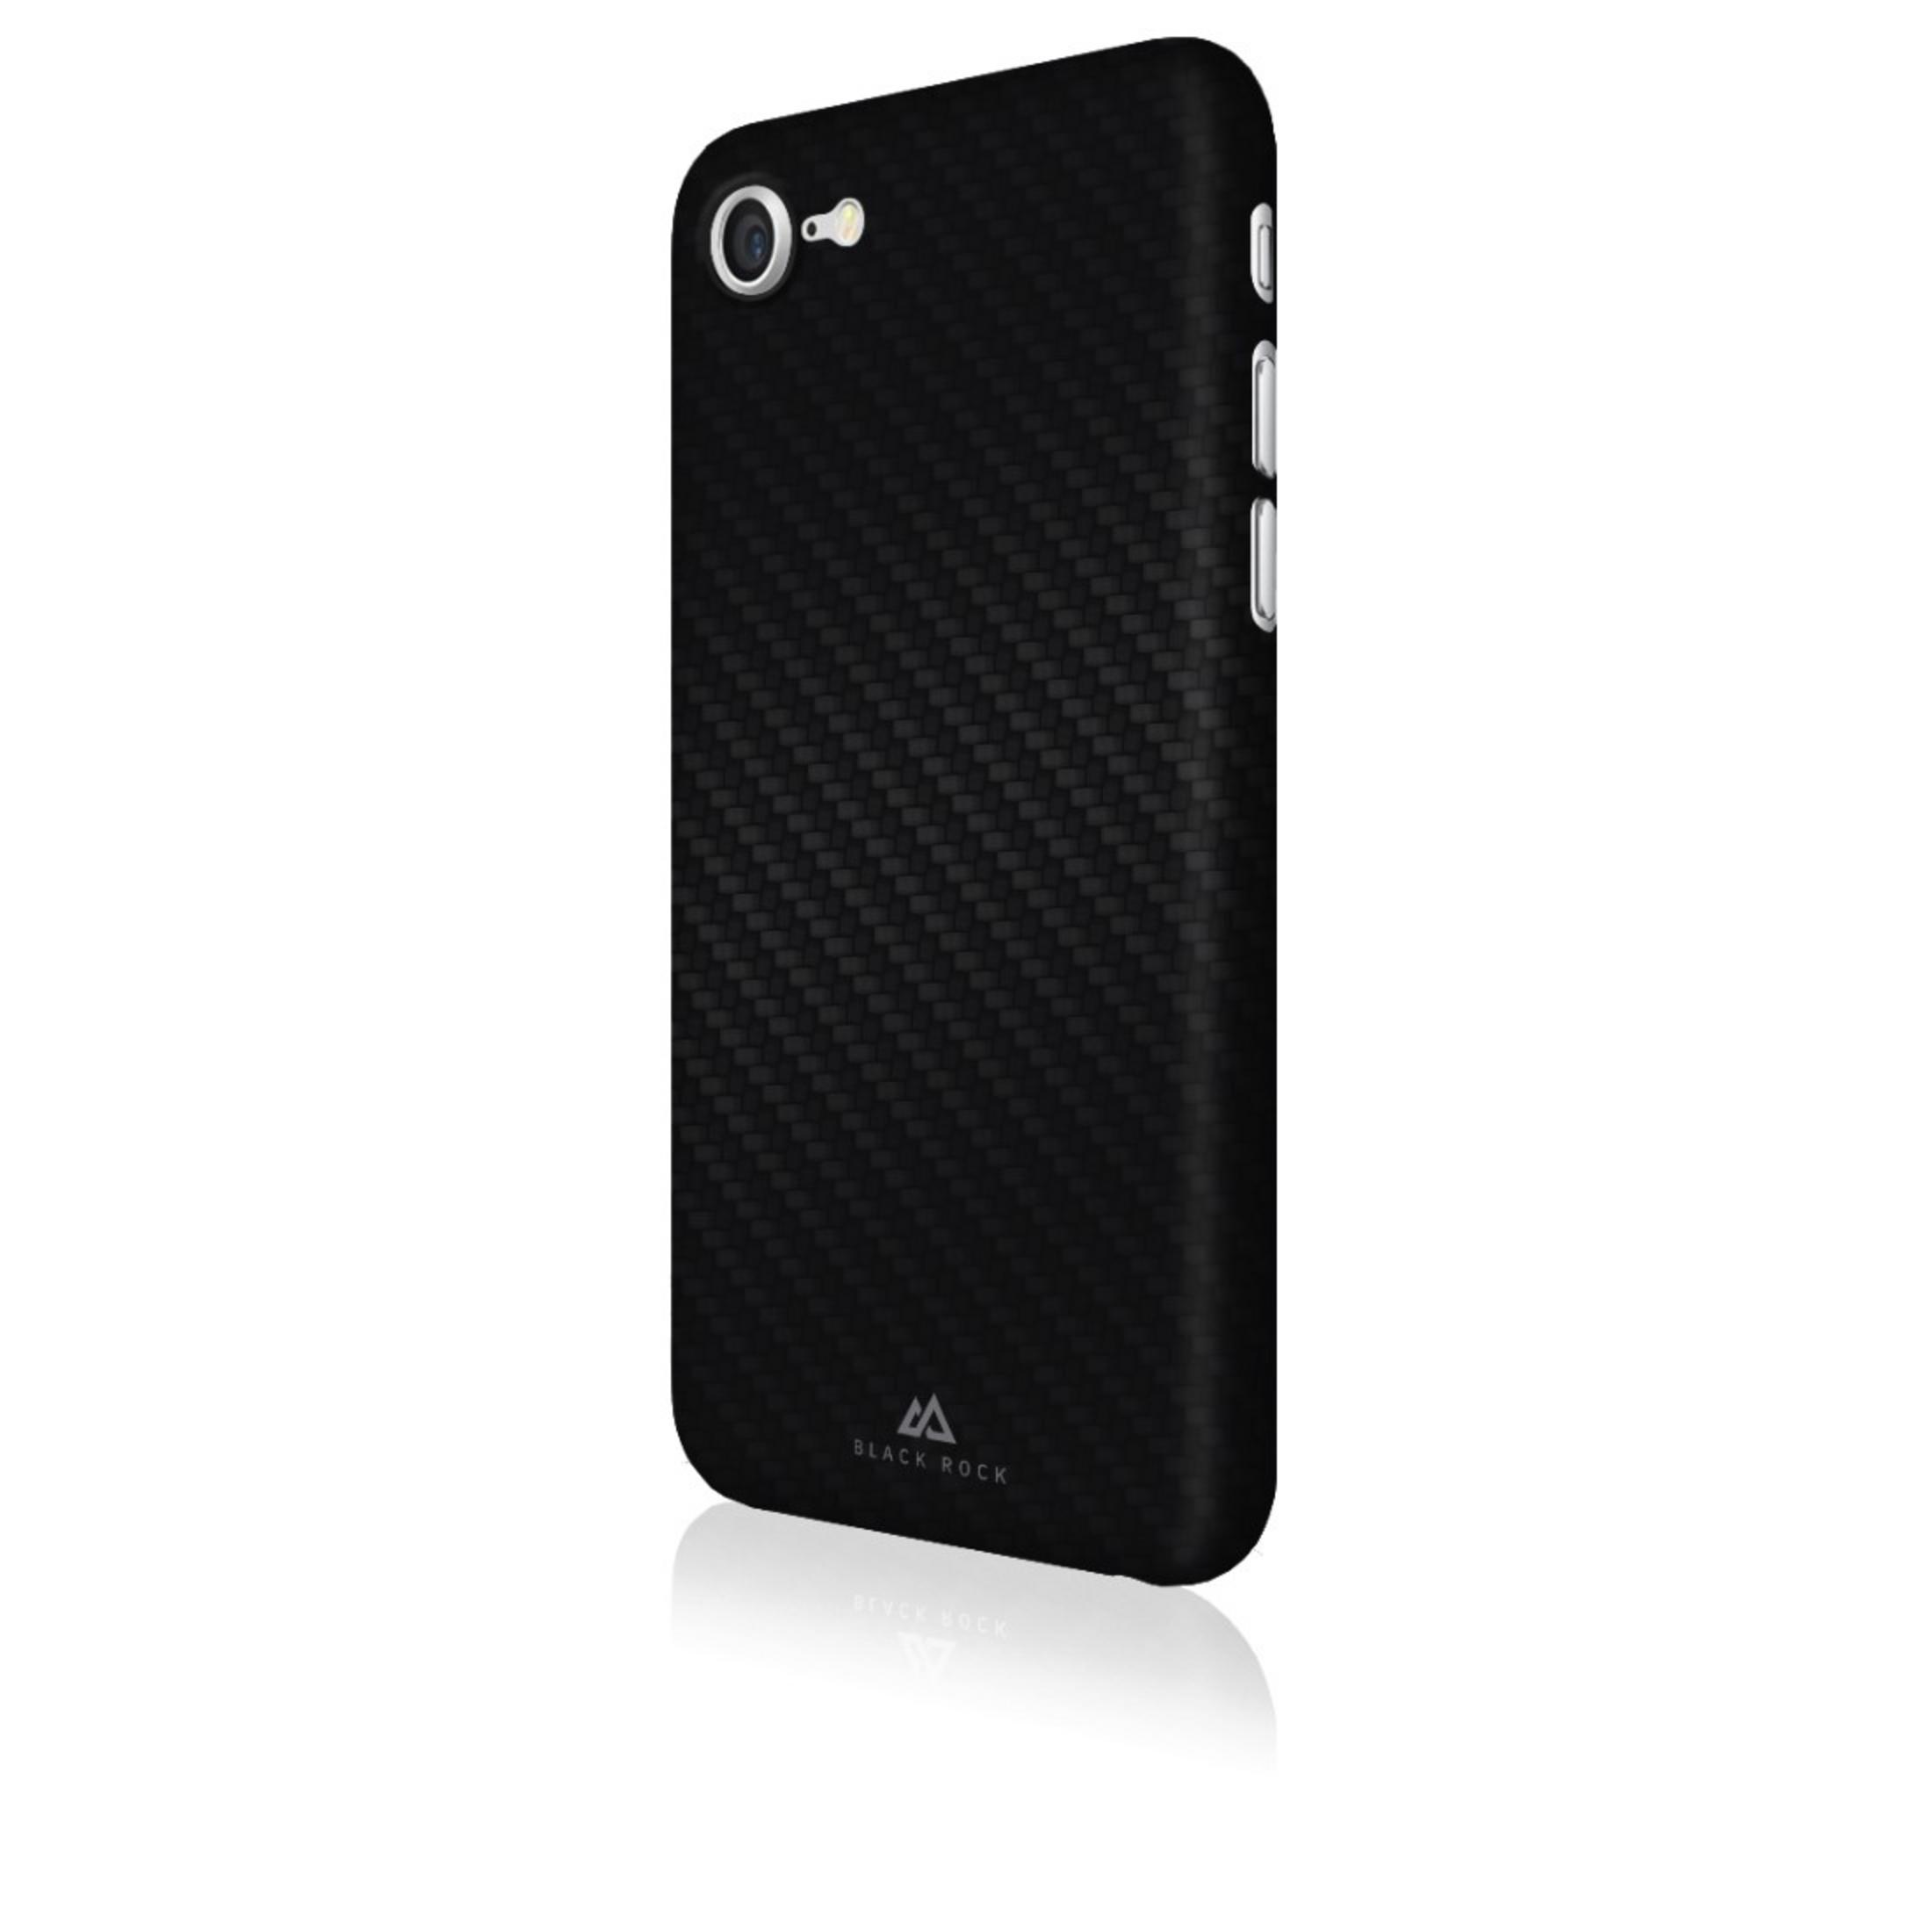 ULT.TH.ICED iPhone SW/FC, BLACK IPH.7/8 Flex Carbon 7, Backcover, Apple, CO 180525 ROCK